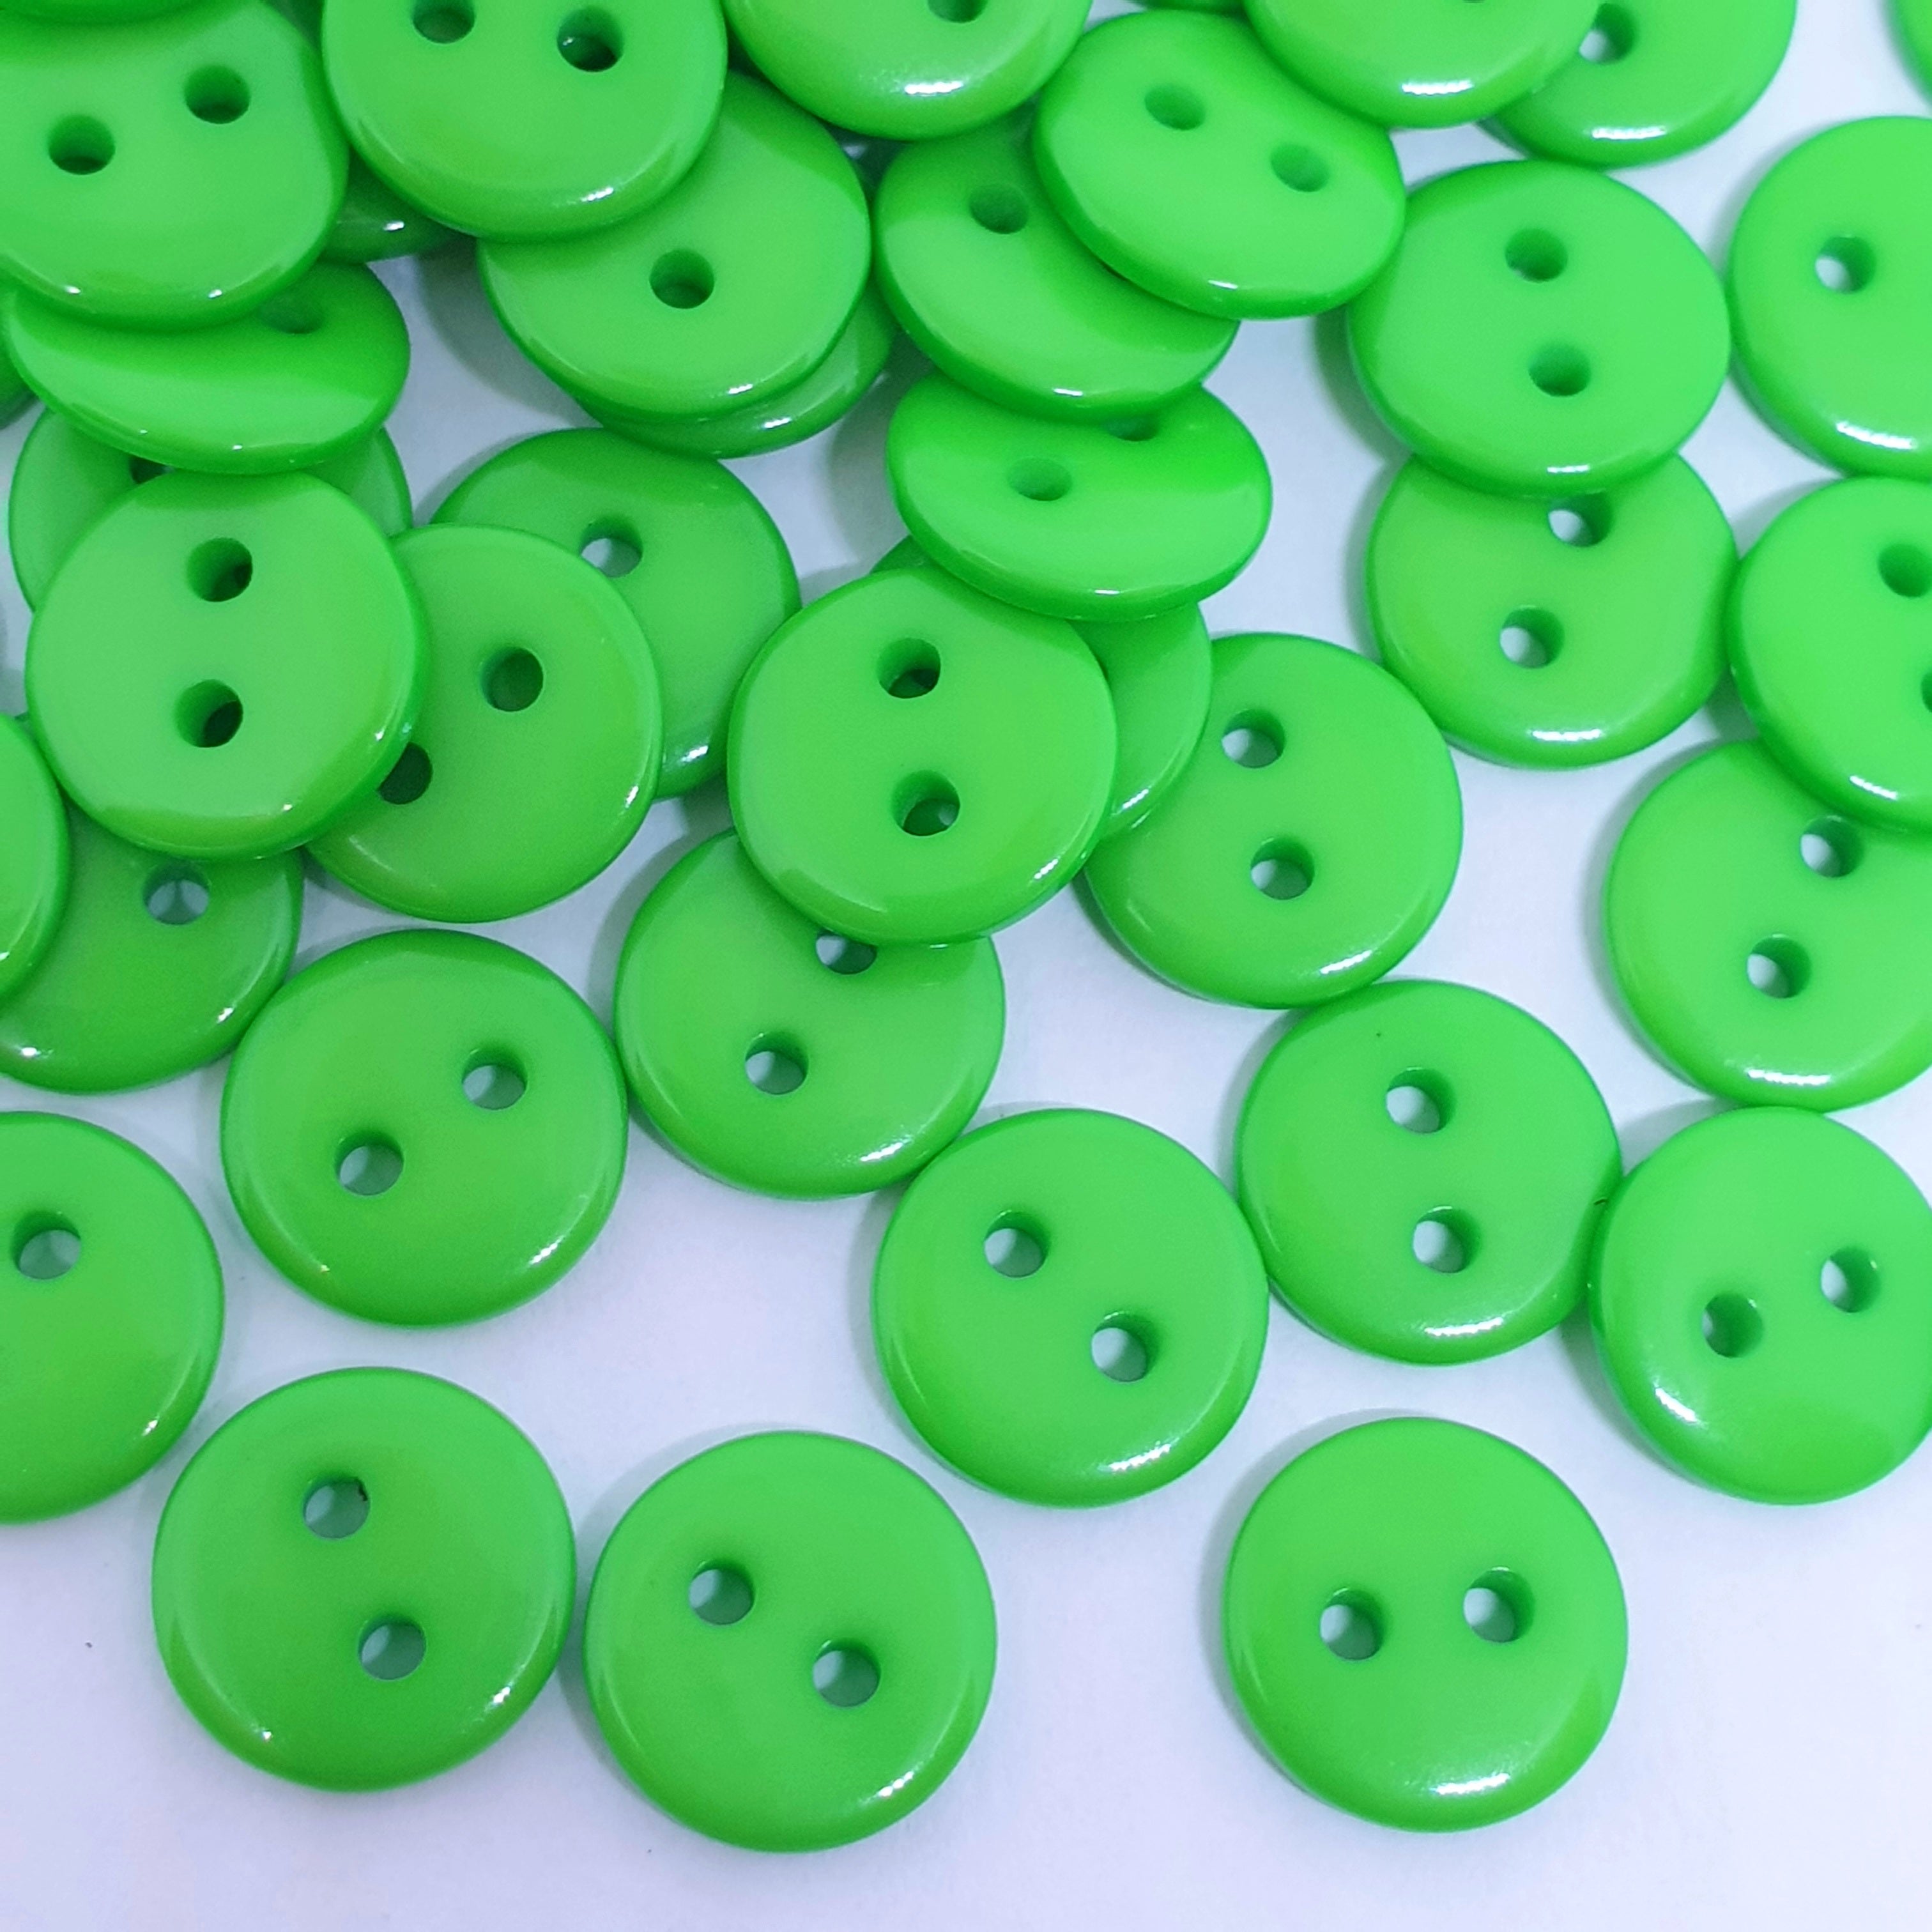 MajorCrafts 120pcs 9mm Bright Green Small 2 Holes Round Resin Sewing Buttons B16